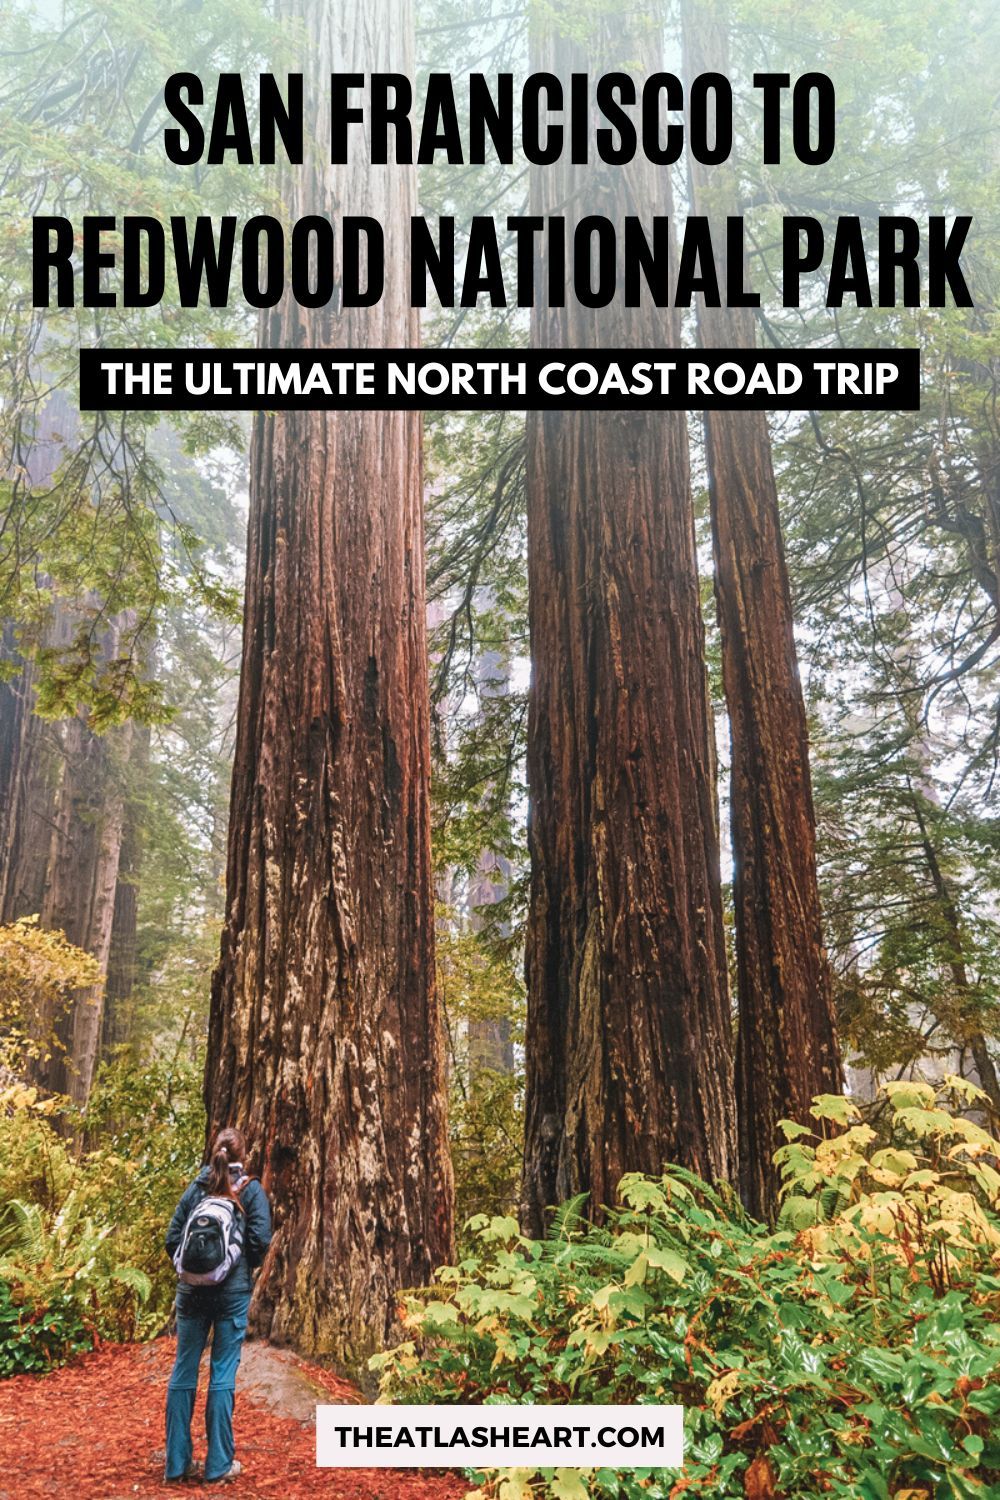 San Francisco to Redwood National Park: The Ultimate North Coast Road Trip